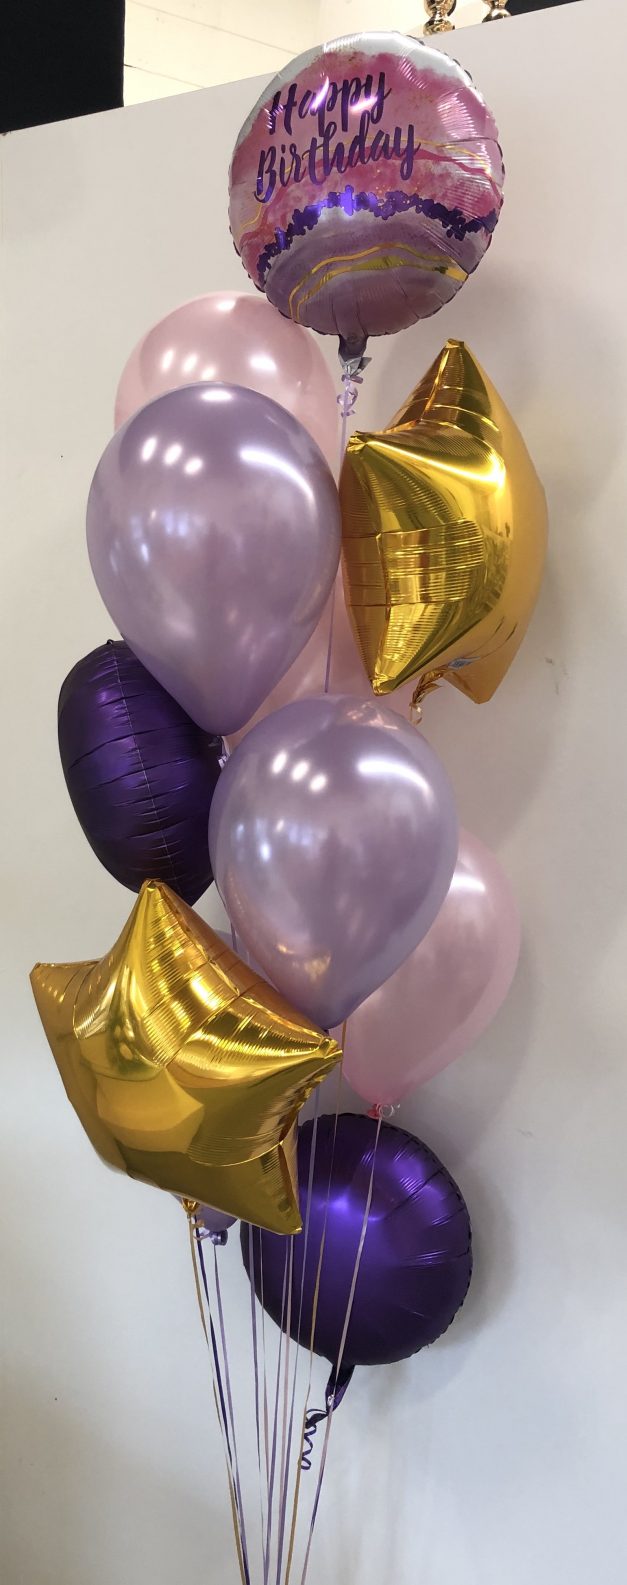 group of 11 balloons with latex and mylars